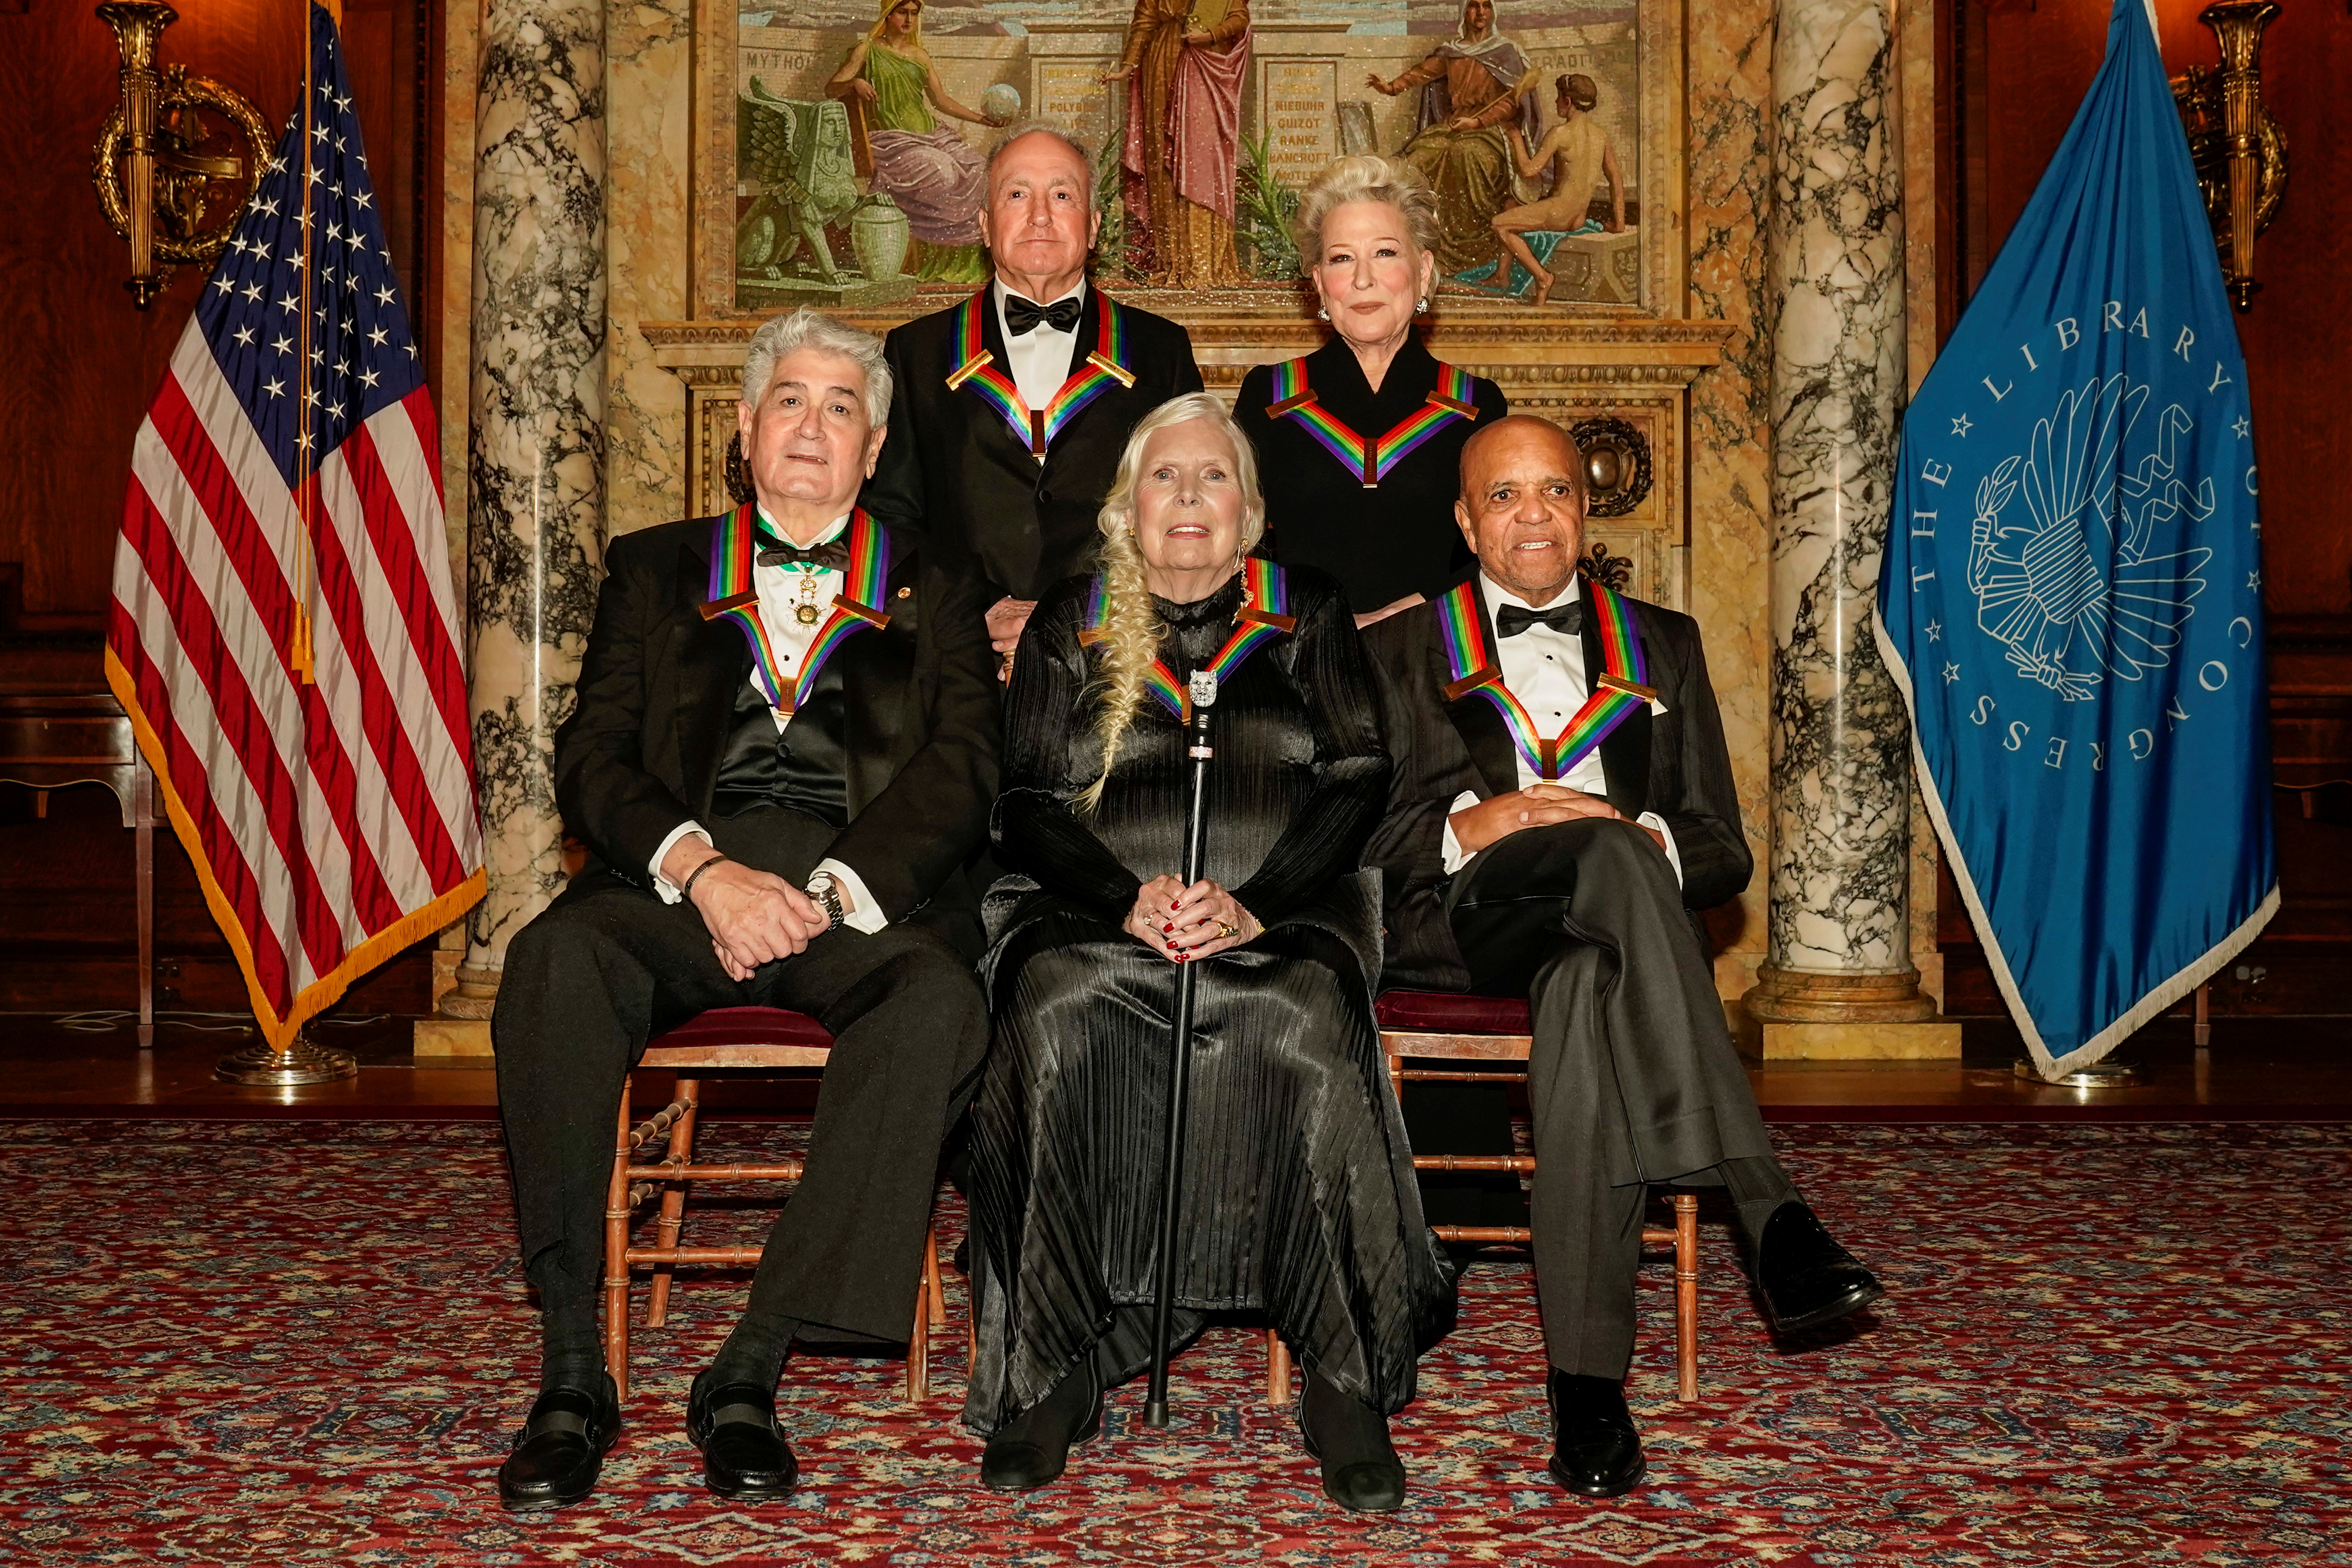 Kennedy Center Honorees, operatic bass-baritone Justino Diaz, Saturday Night Live creator Lorne Michaels, singer-songwriter Joni Mitchell, actress and singer-songwriter Bette Midler, and Motown founder, songwriter, producer, and director Berry Gordy, pose for the 44th Kennedy Center Honors class photo following the Medallion Ceremony at the Library of Congress in Washington, D.C., U.S. December 4, 2021. REUTERS/Ken Cedeno